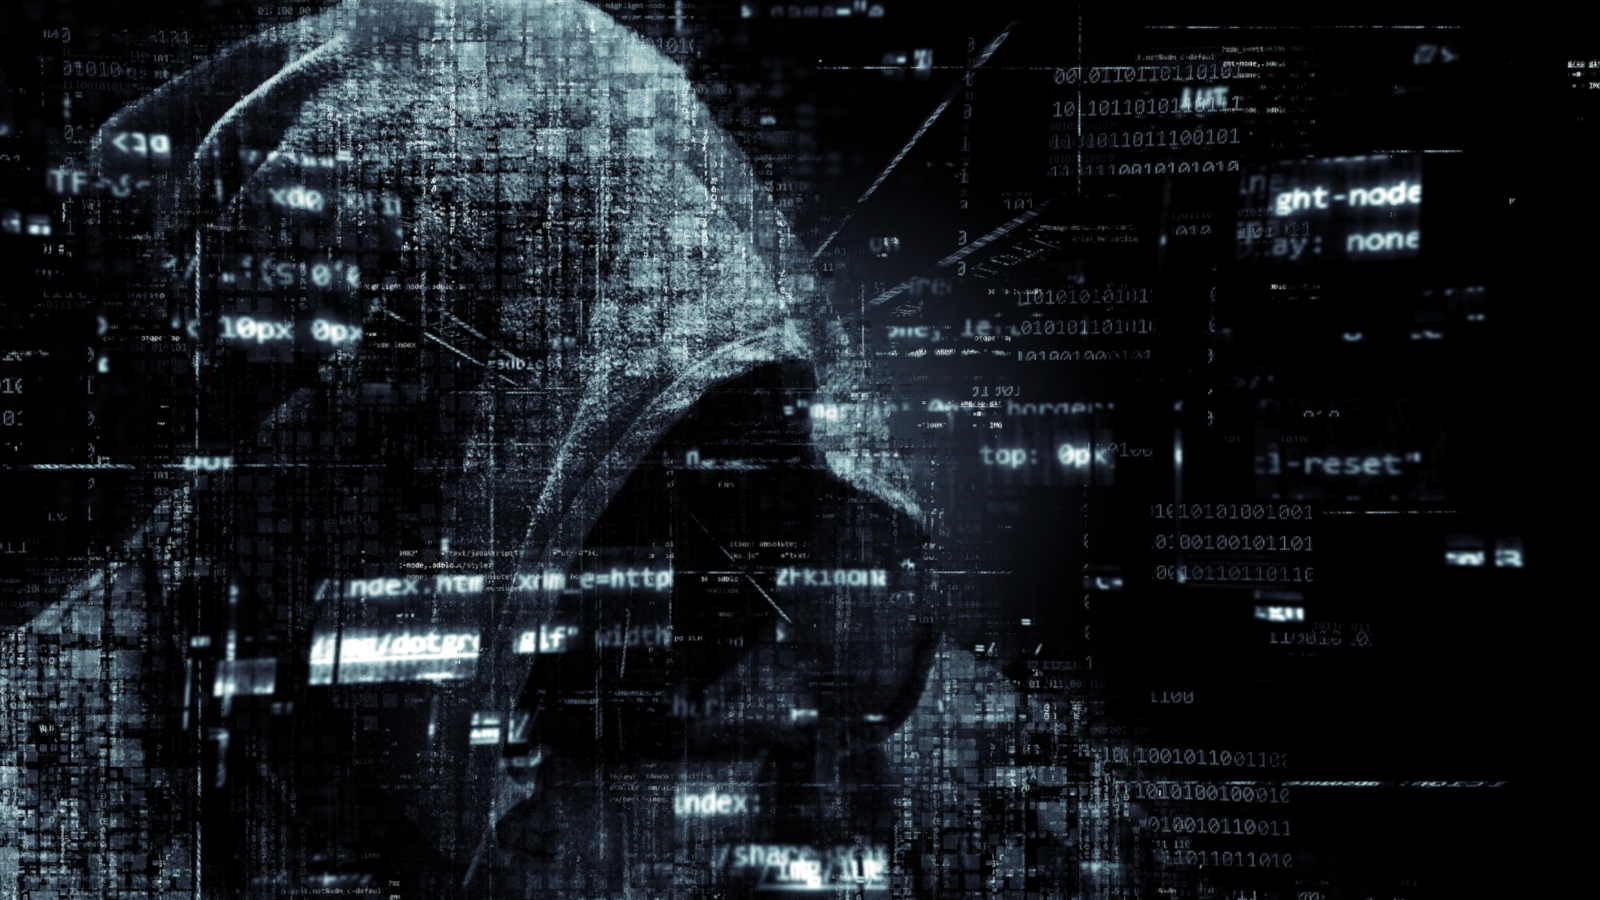 BlackMatter ransomware emerges from the shadow of DarkSide  Sophos News